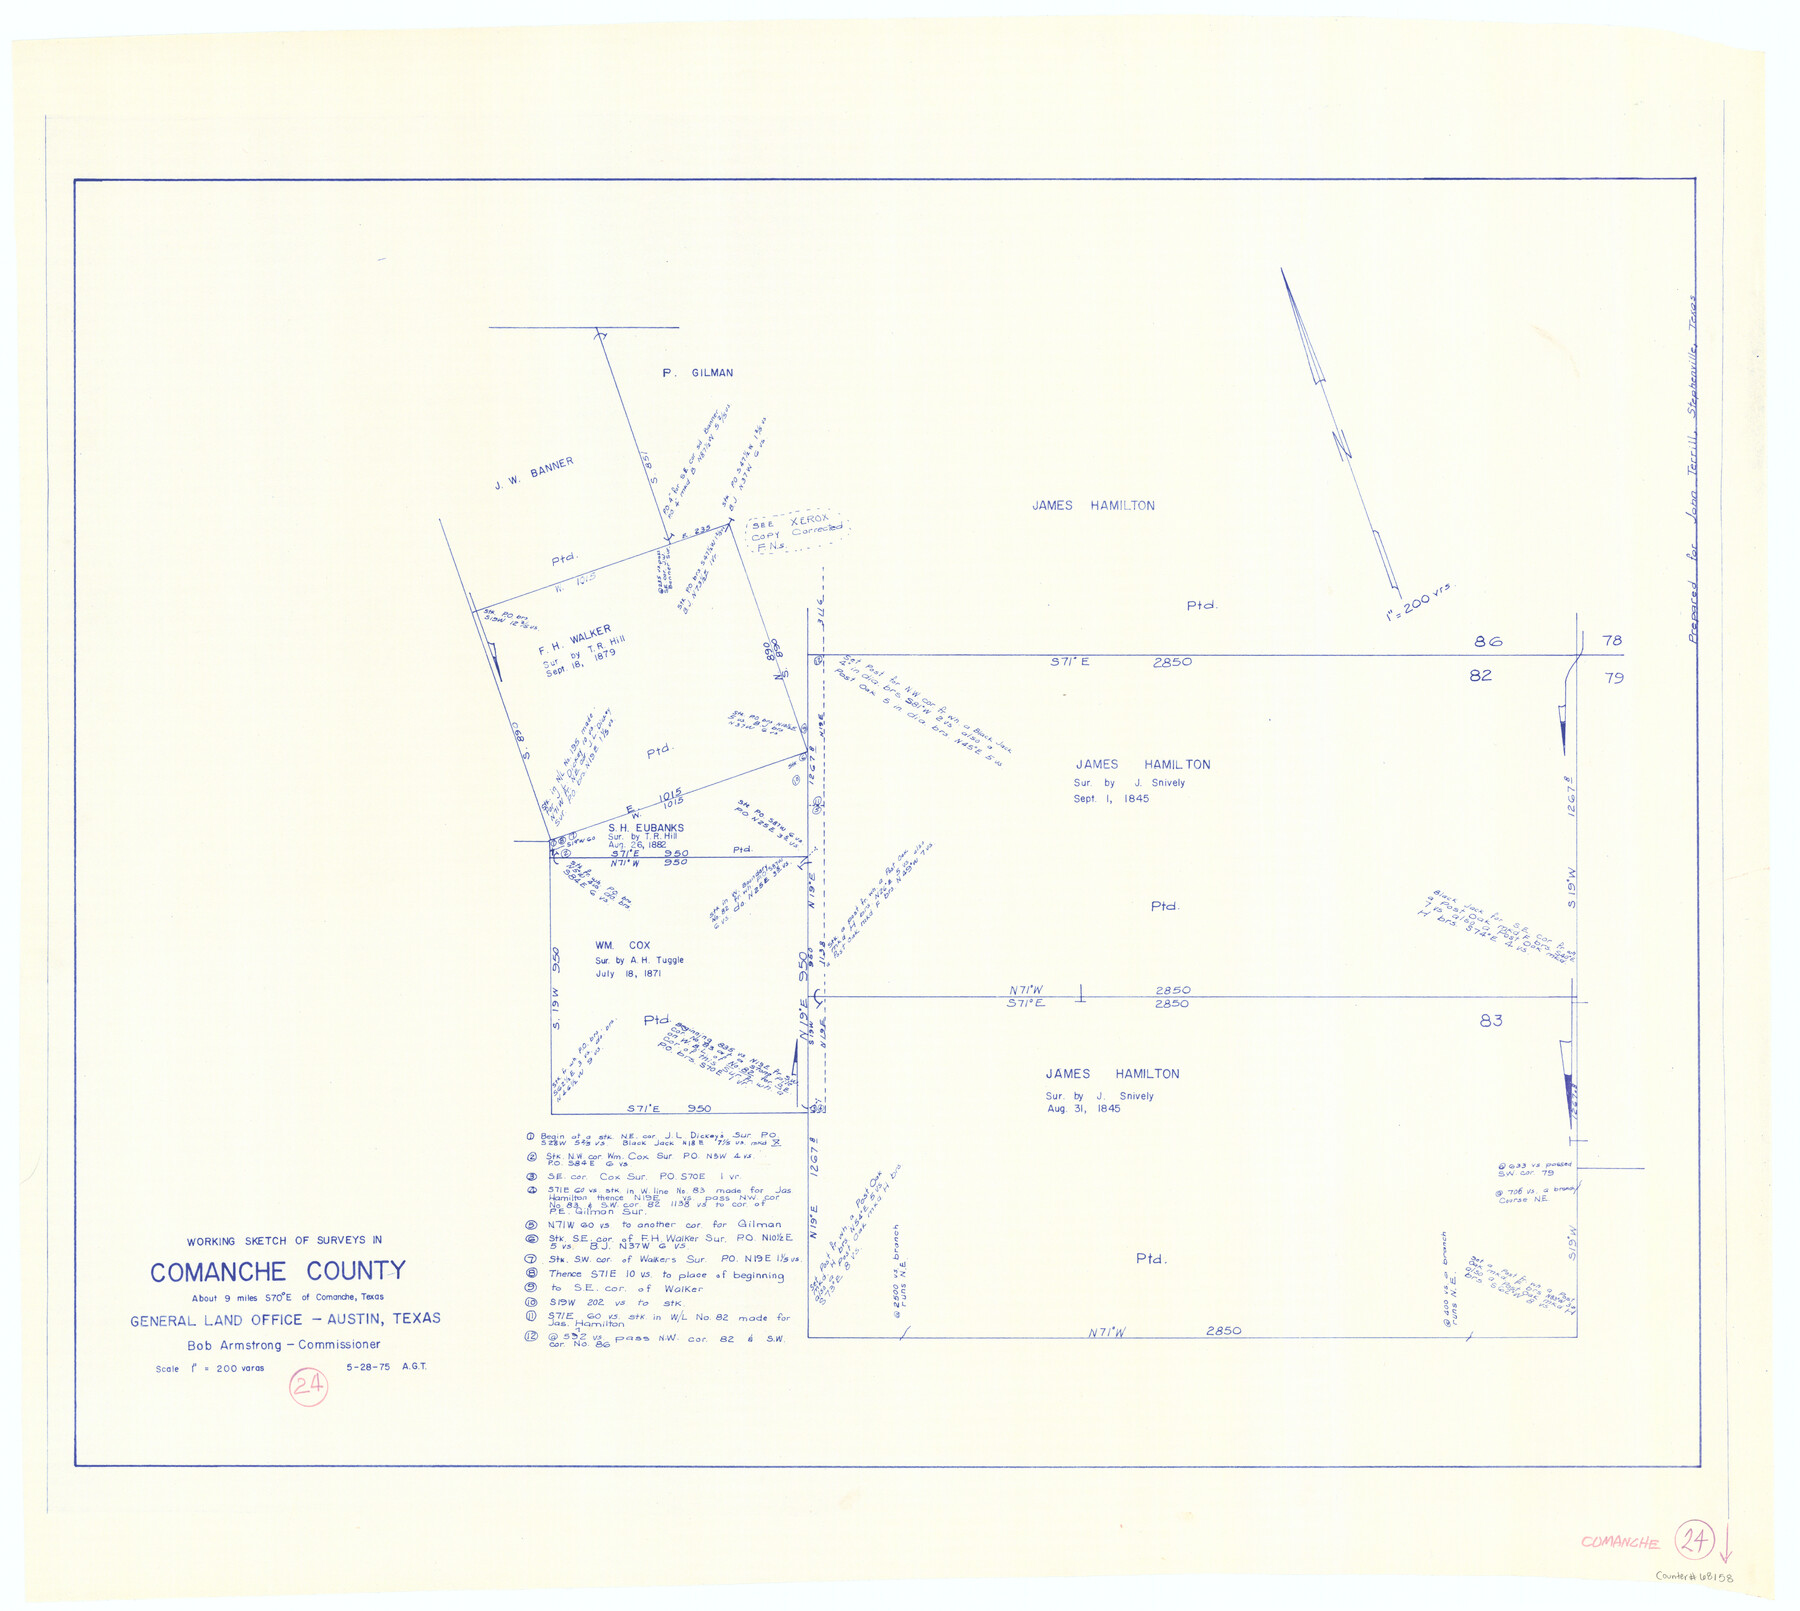 68158, Comanche County Working Sketch 24, General Map Collection